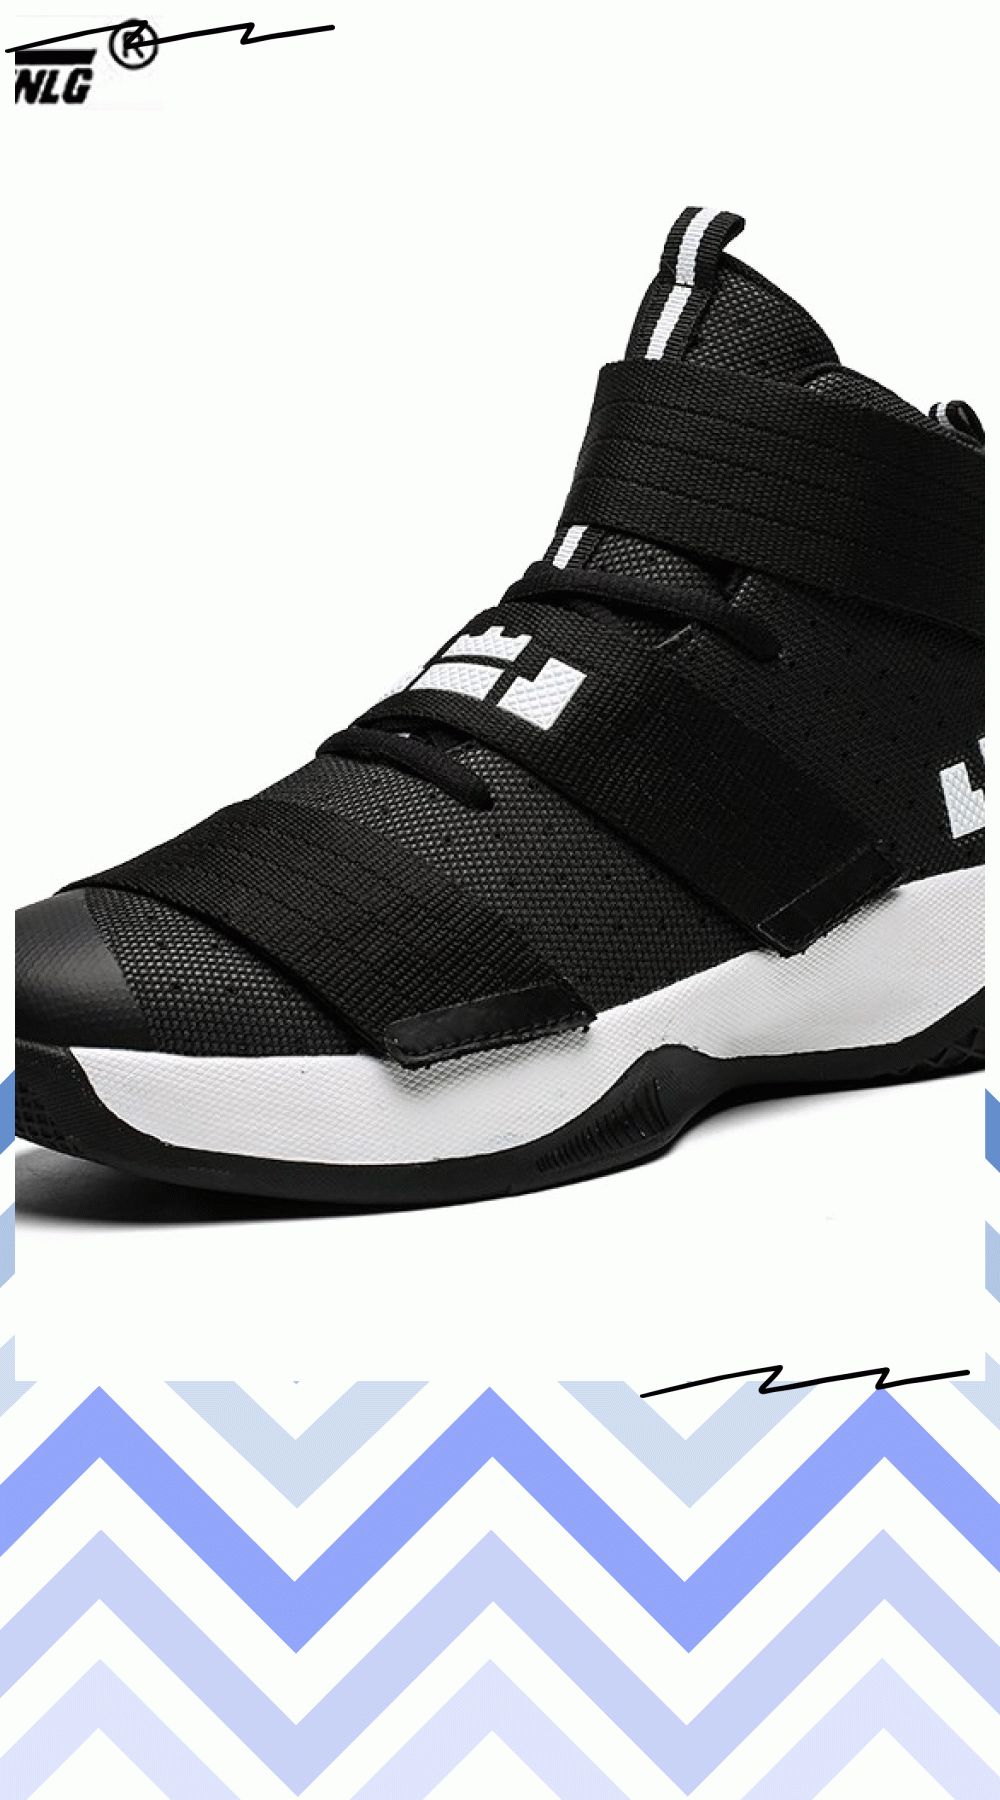 mens sneakers basketball shoes for men breathable cushioning lightweight upper high top bounce an gif small